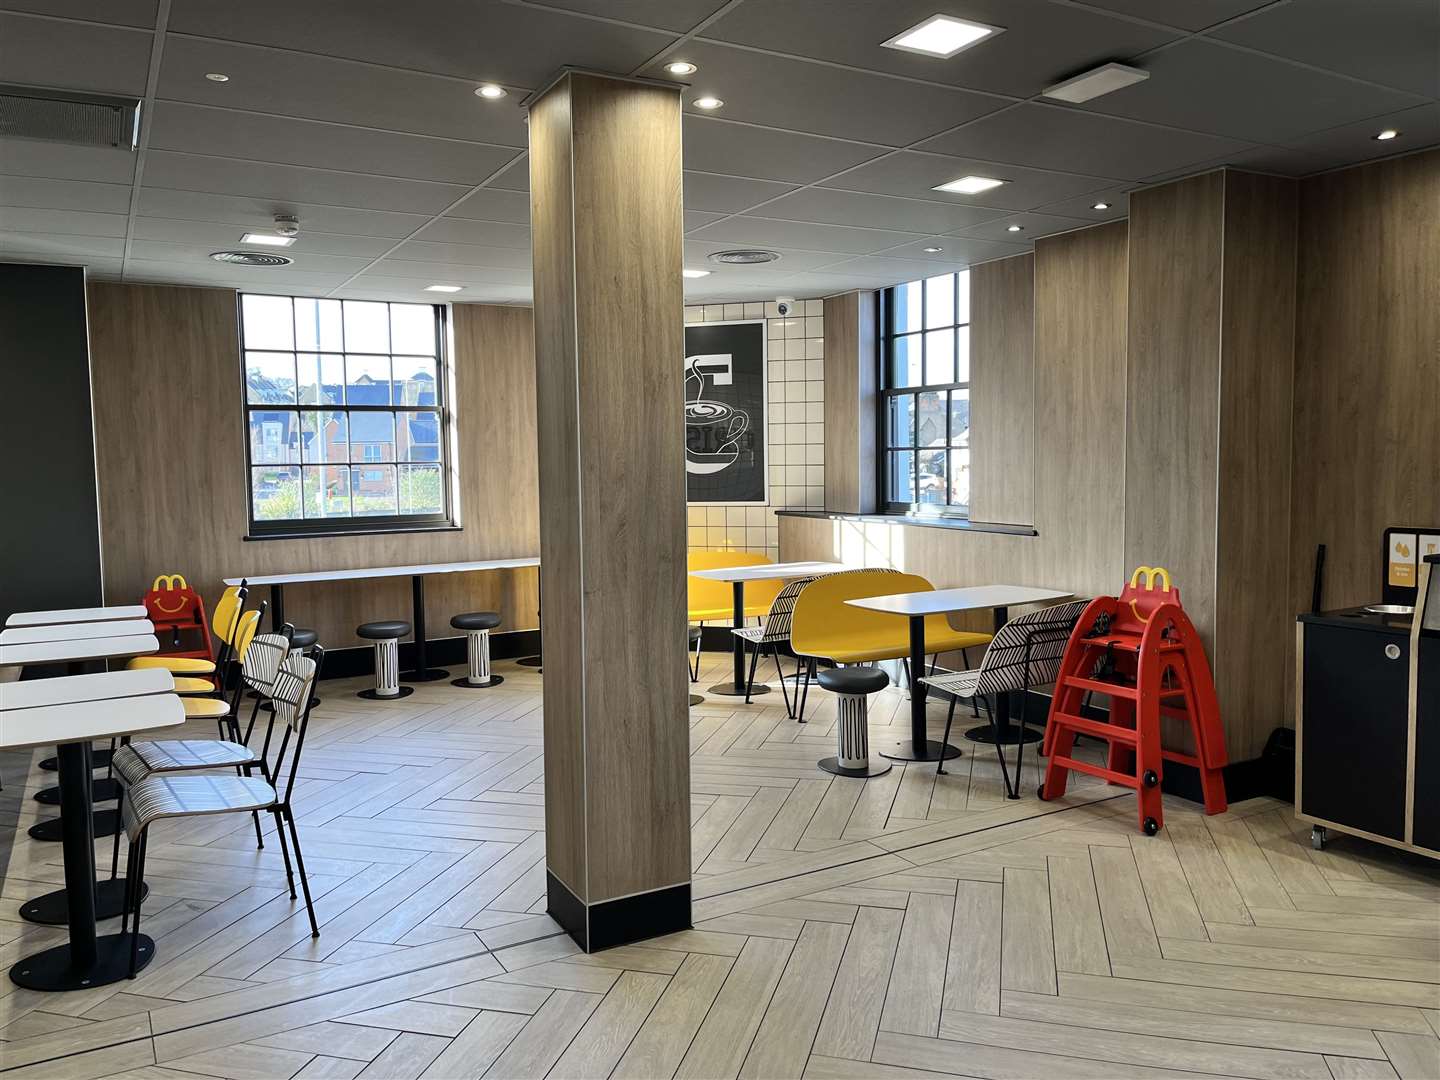 Inside the newly-reopened McDonald's in London Road, Greenhithe